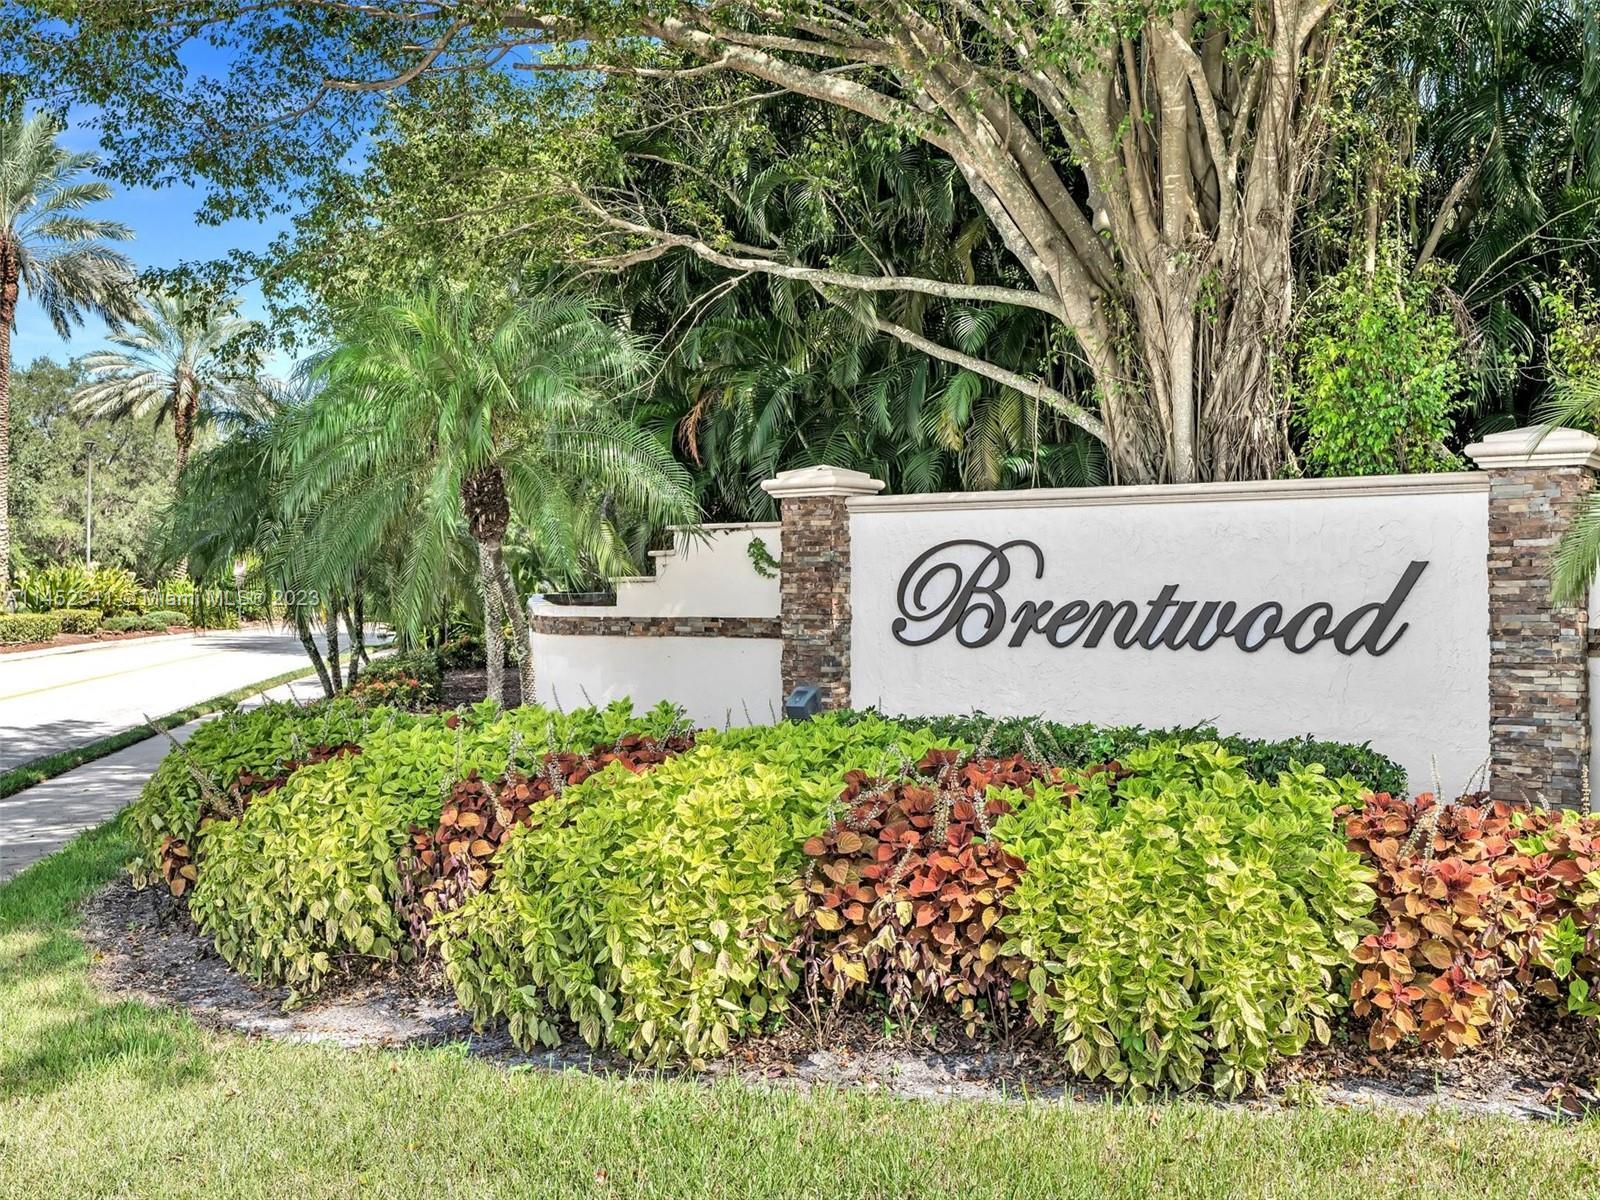 Rarely Sold Brentwood Villa,In a well sought after community.
Well maintained and very specious hom